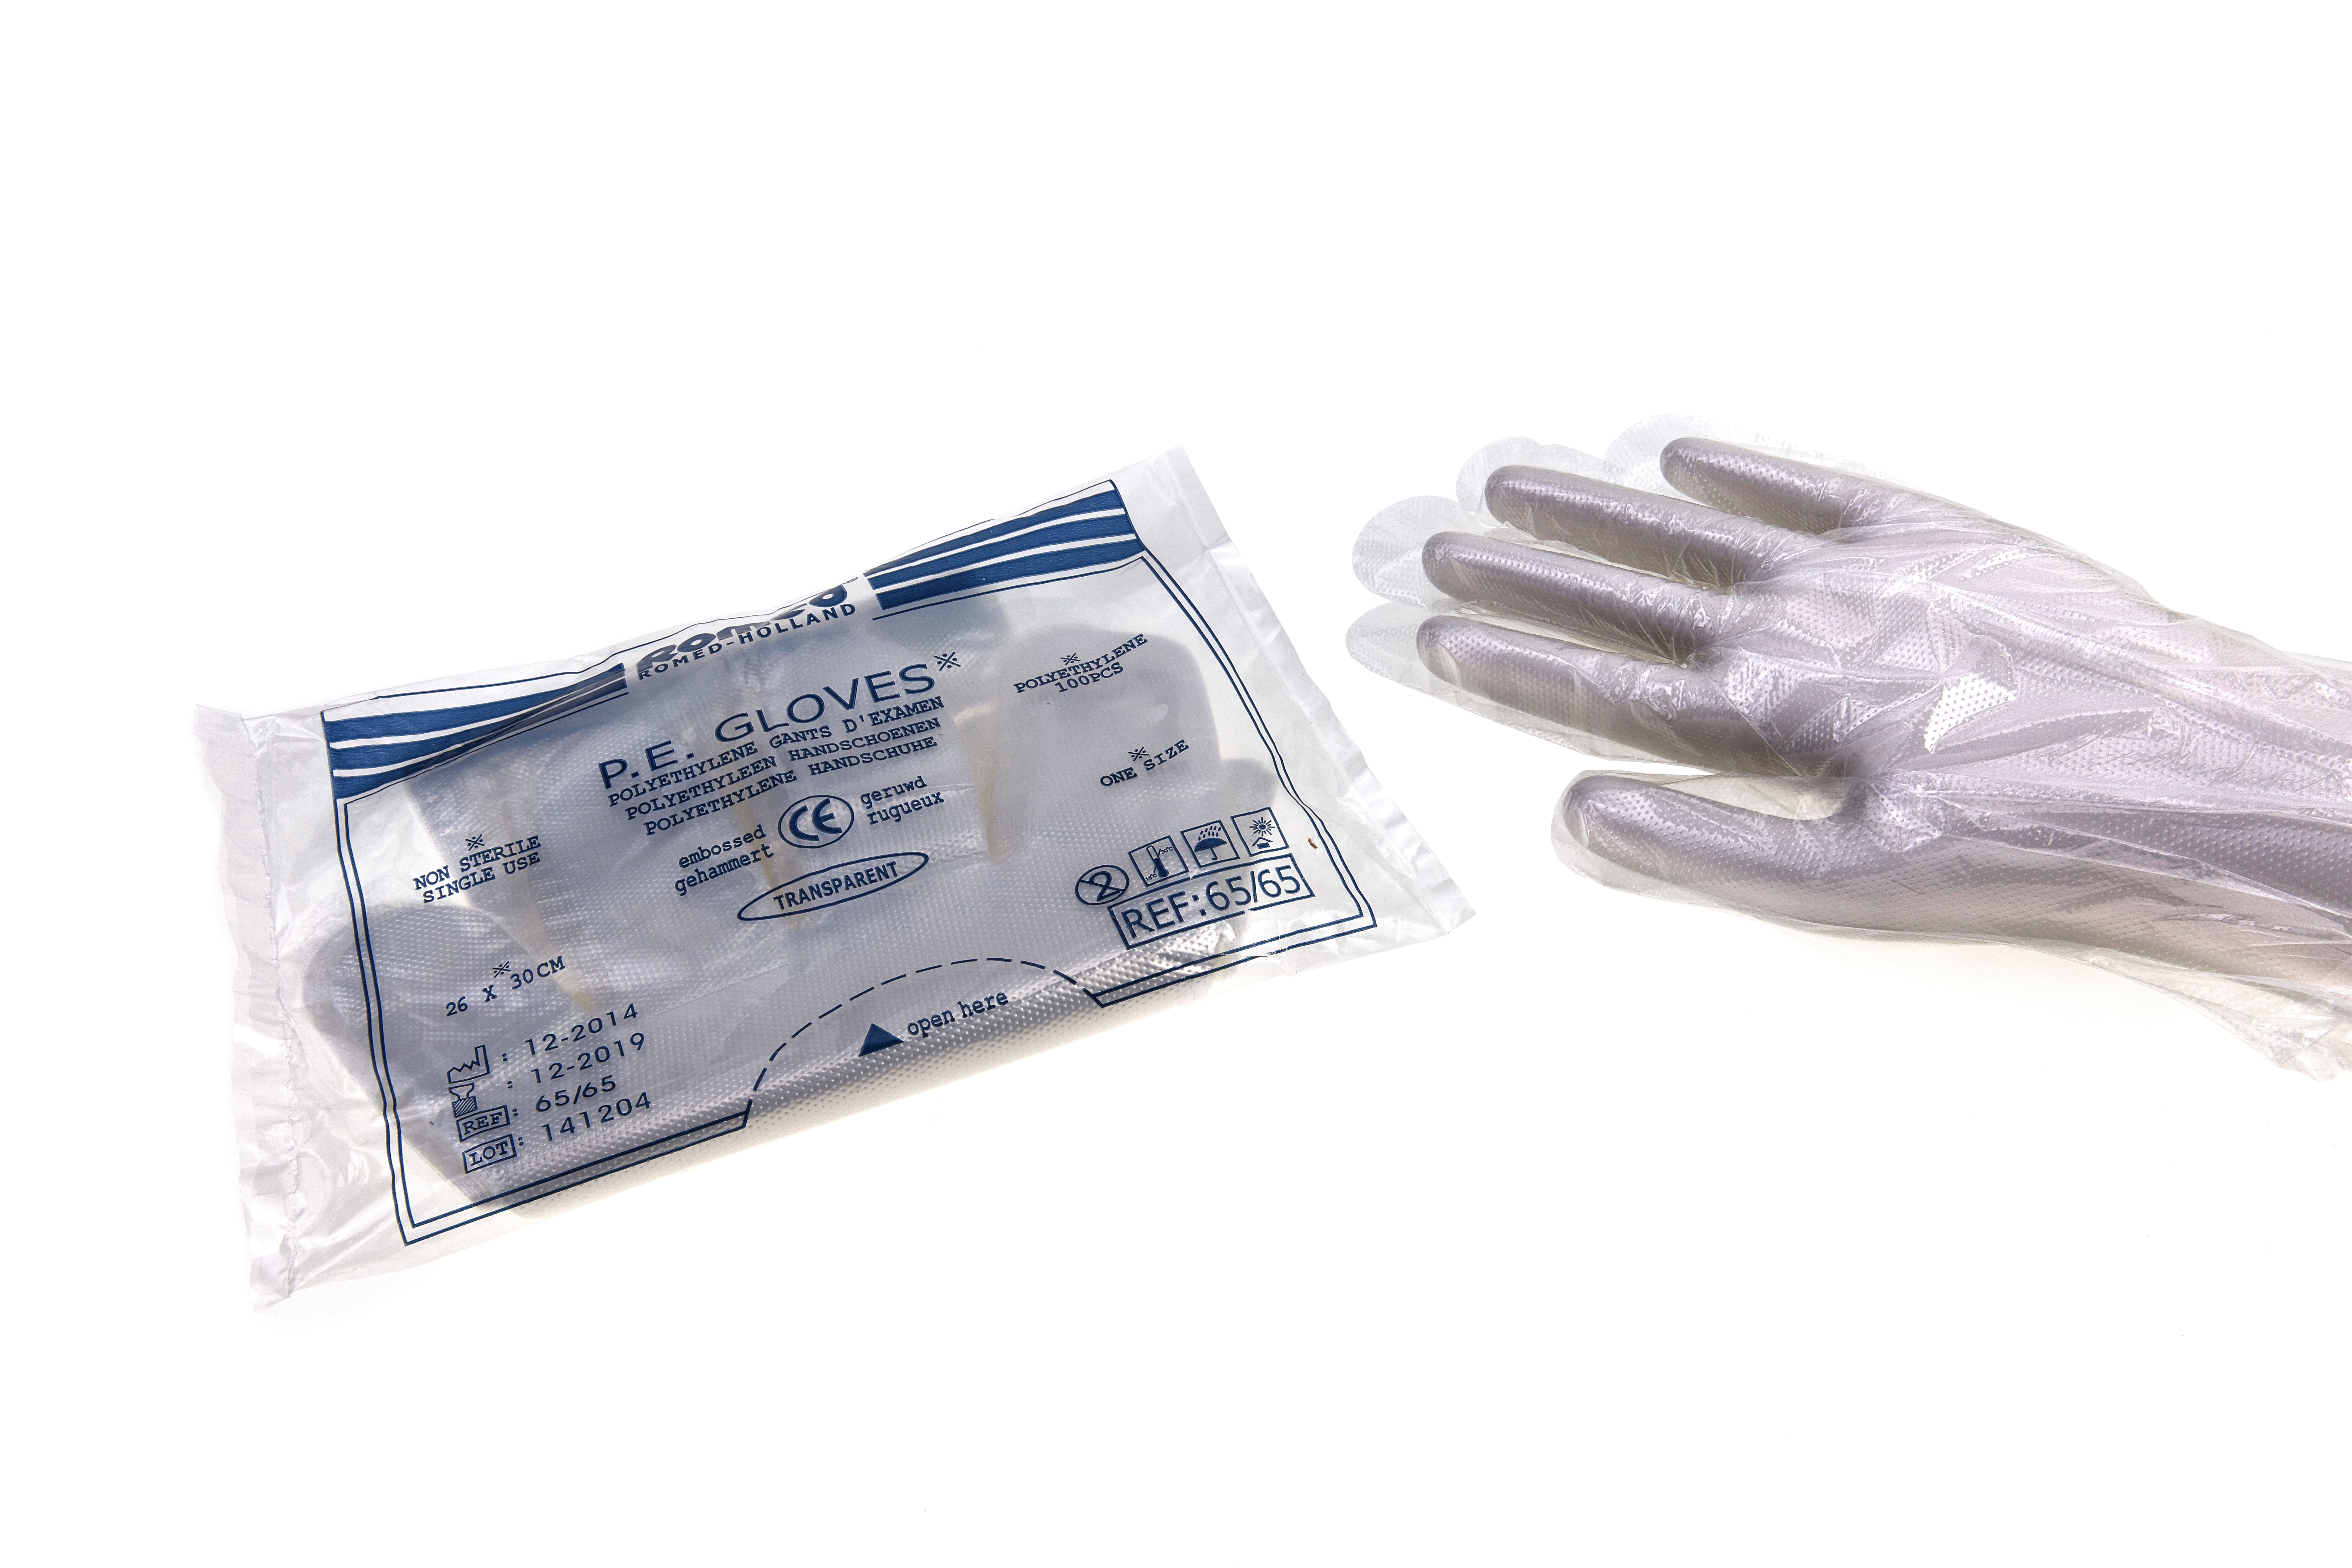 65/65-LW Romed polyethylene gloves, non sterile, embossed, 100 pcs in a polybag, 100 x 100 pcs = 10.000 pcs in a carton.